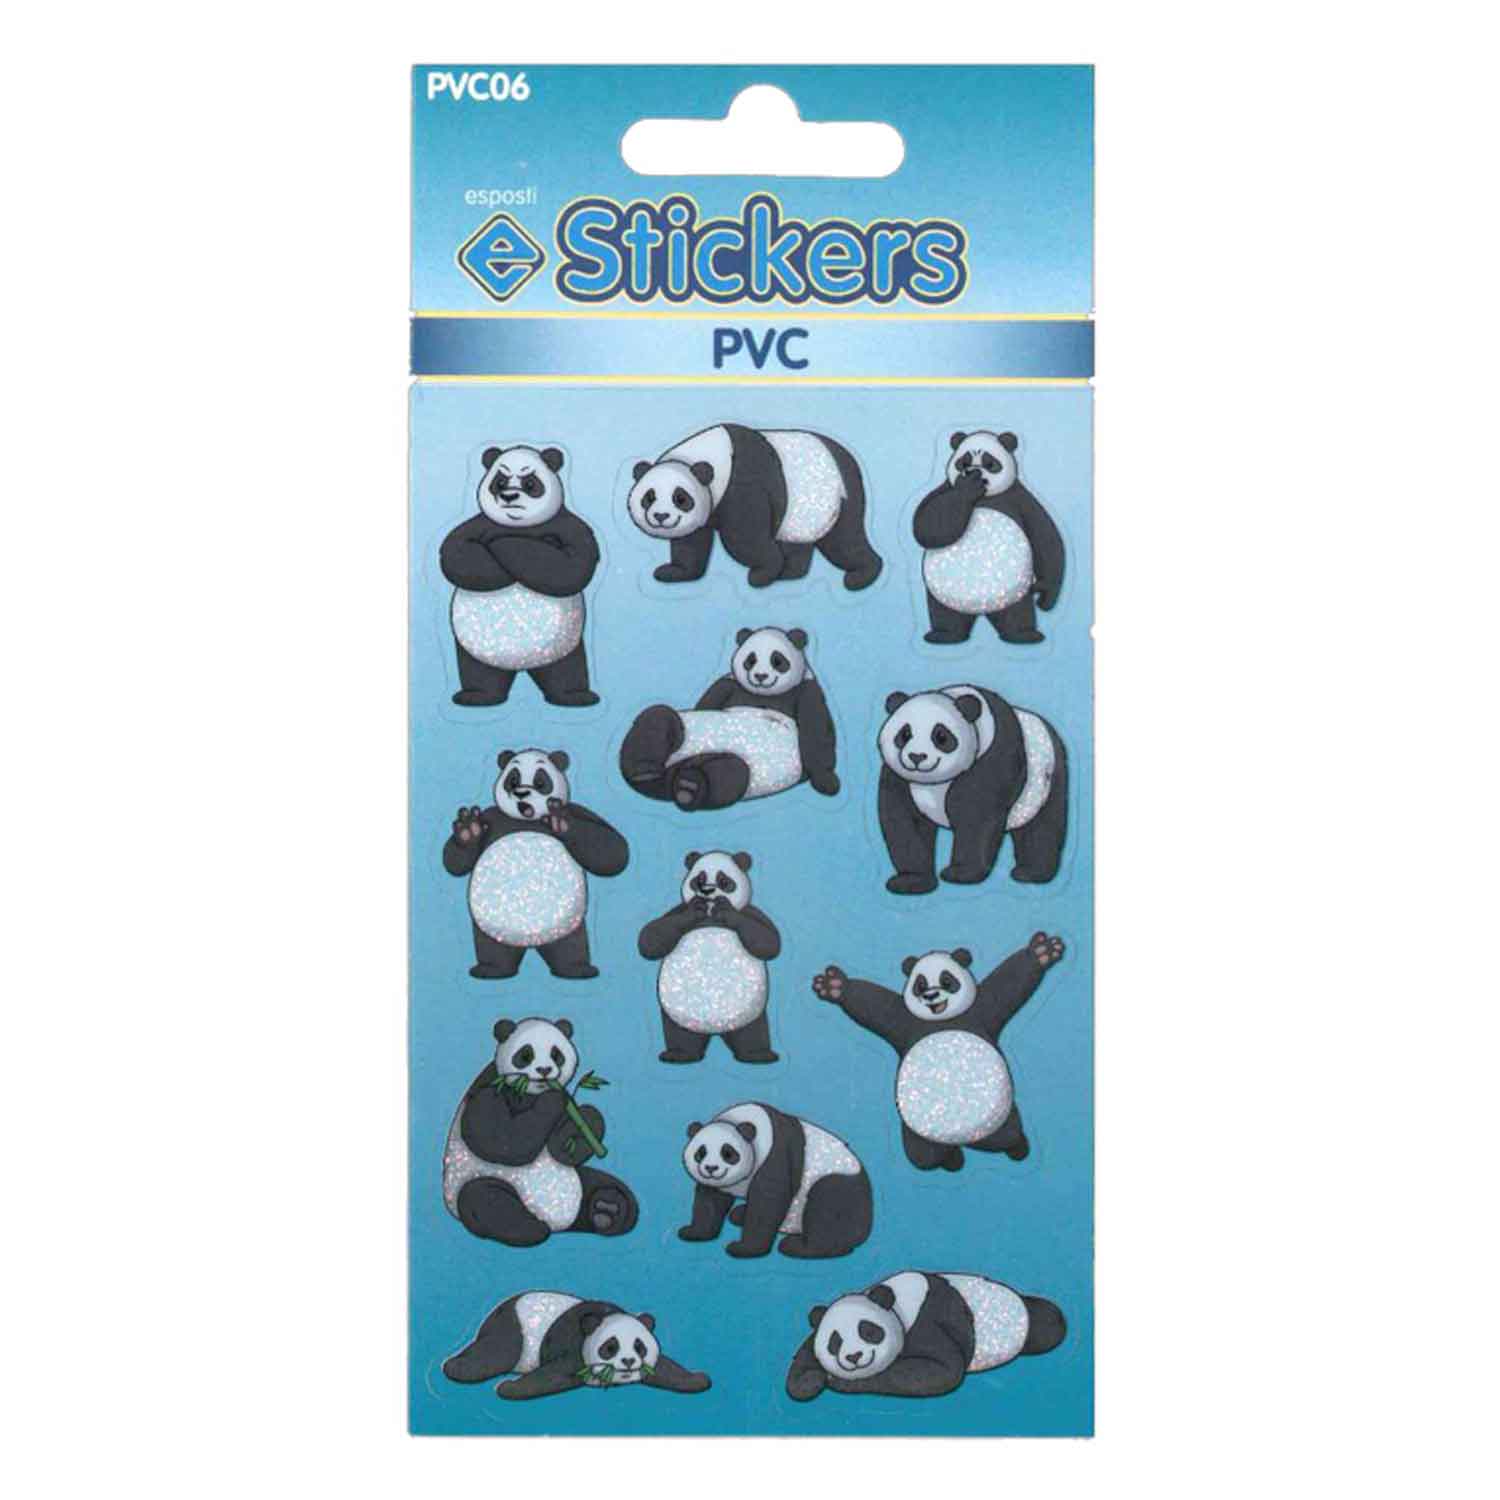 Pandas Self Adhesive PVC Novelty Stickers - Pack of 10